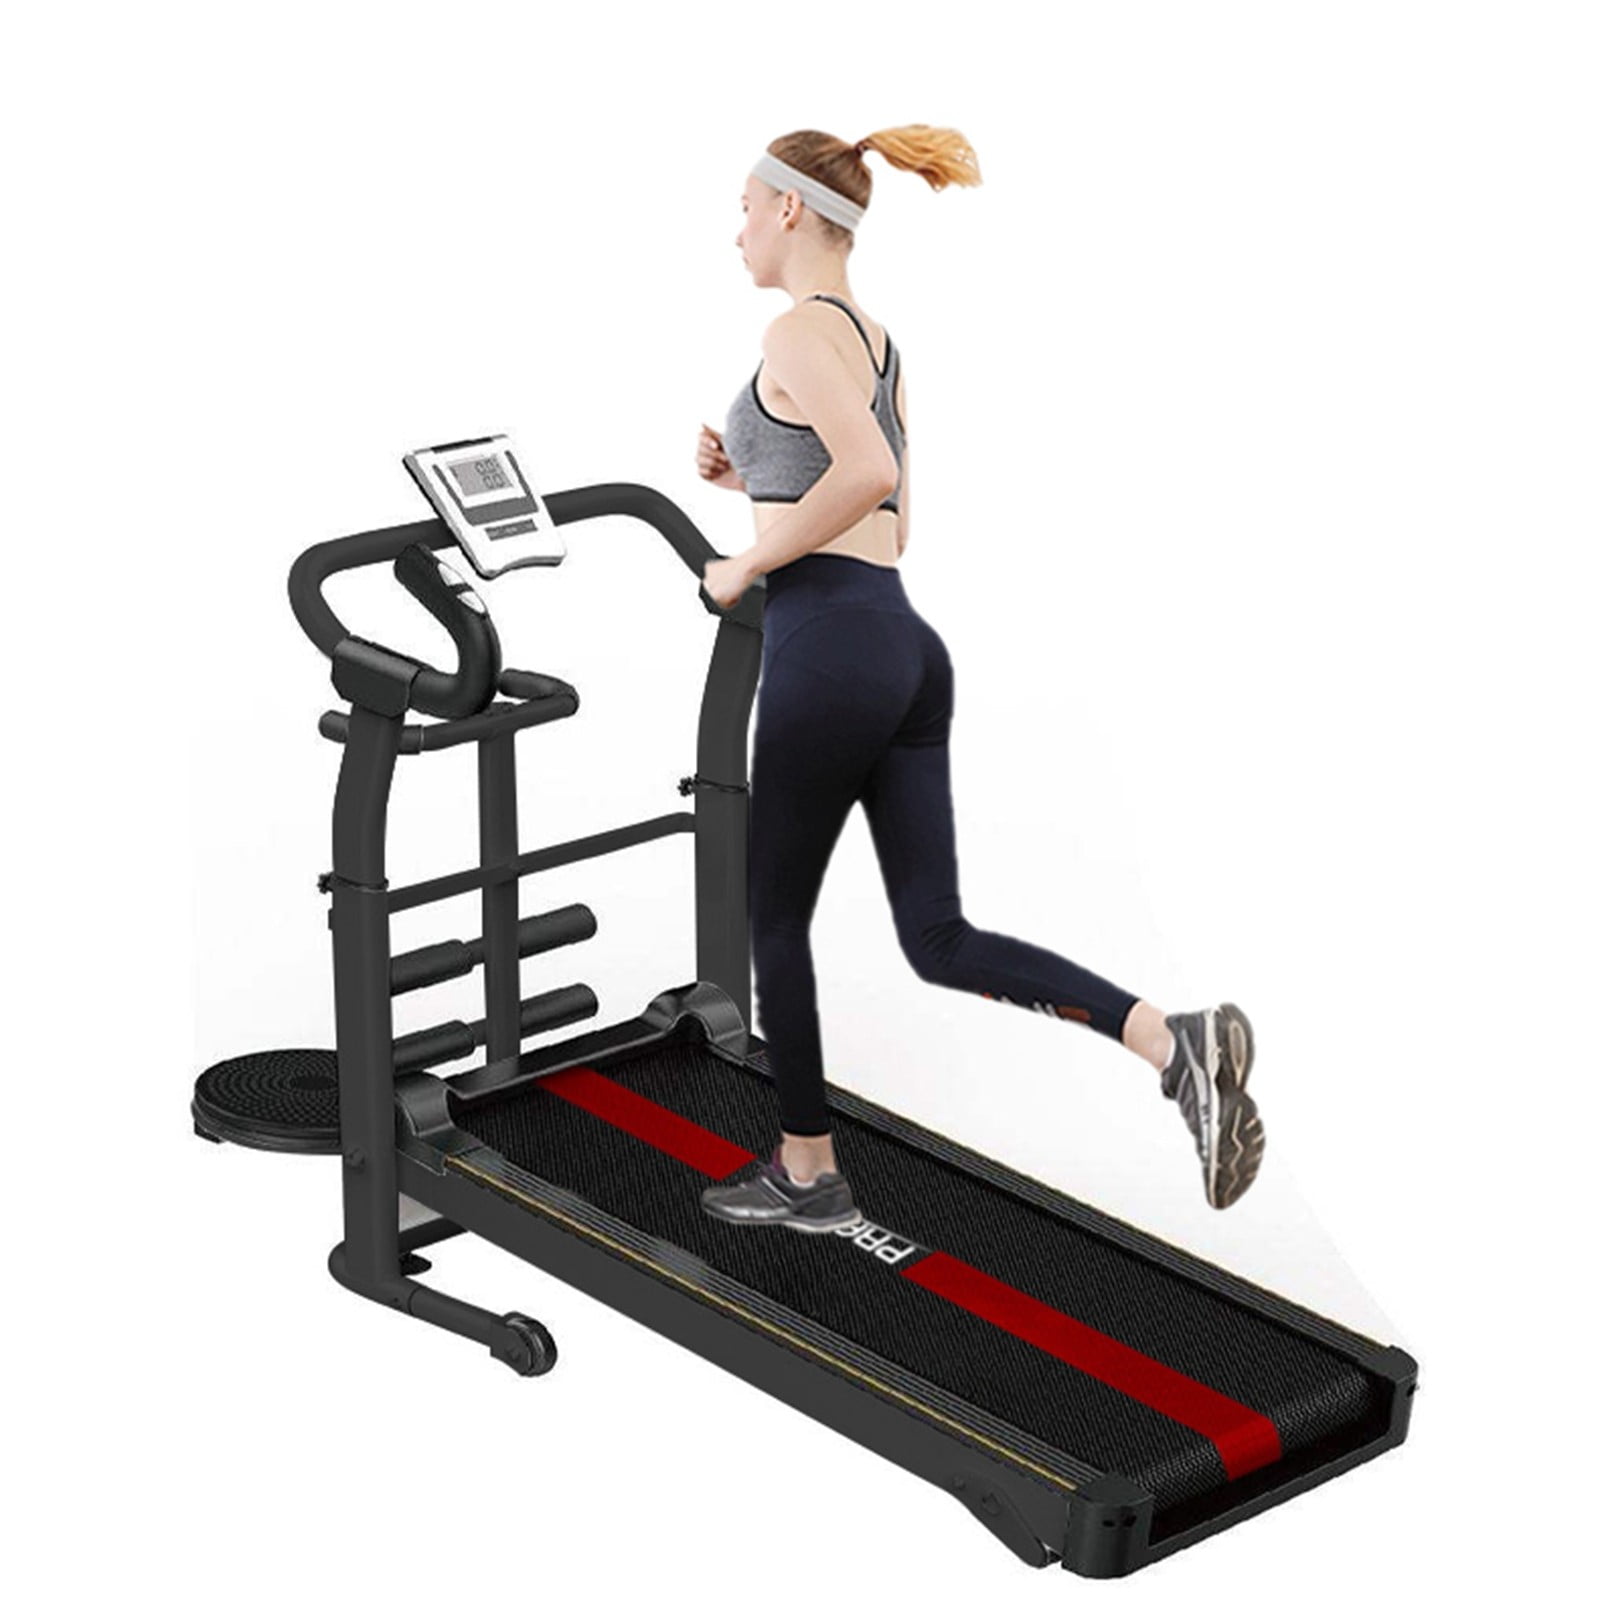 JATENG Folding Treadmill with Bluetooth Connectivity Super Shock-Absorbing Quiet Treadmill for Home Gym 2.5HP Electric Motorized Running Machine with Manual Incline & Speakers